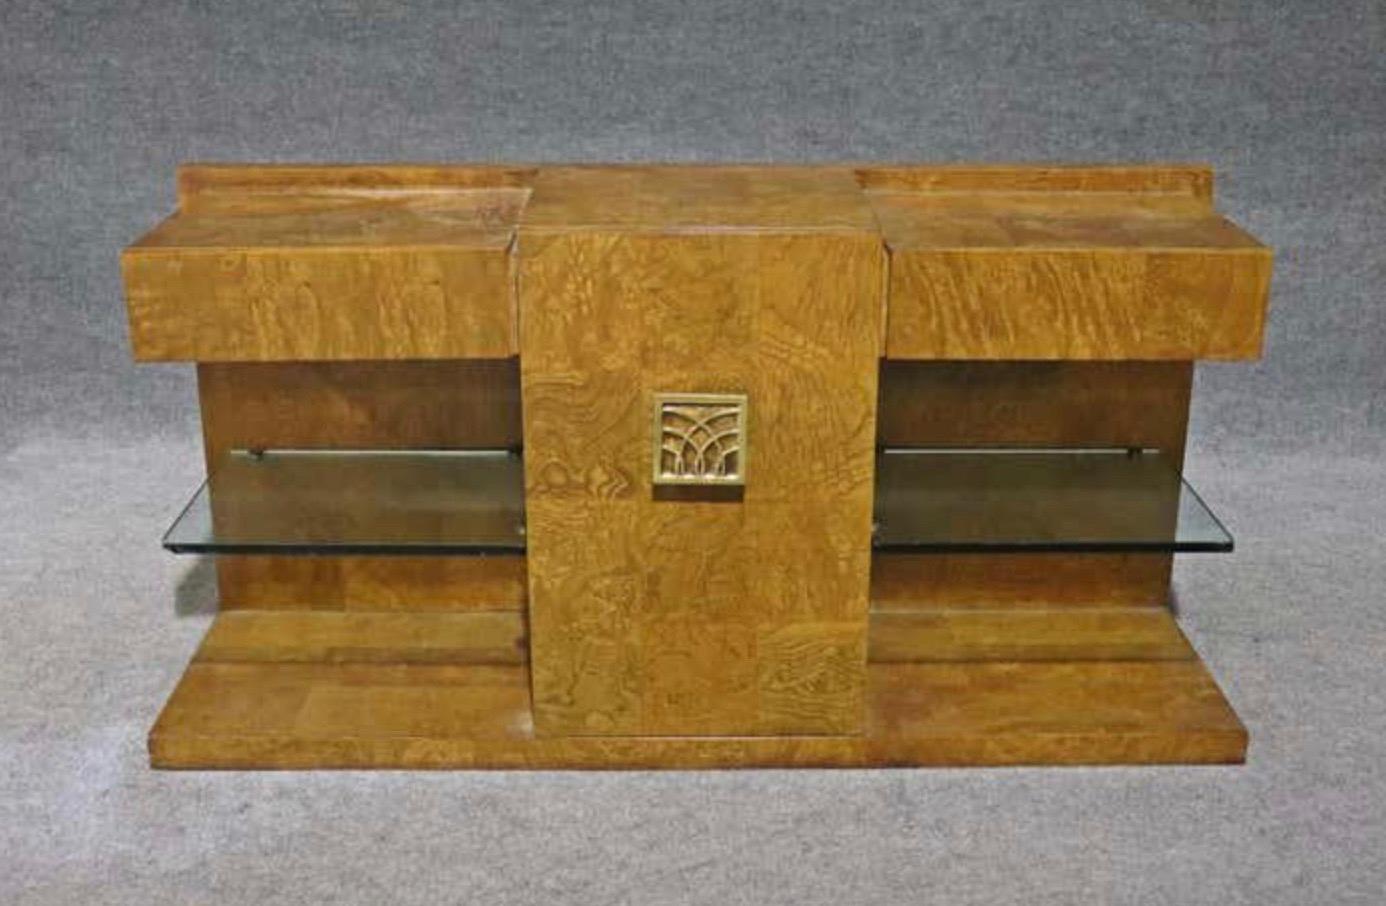 Extraordinary and Incredibly Rare Art Deco Burled Console by Jay Spectre for Century Furniture. Floating Glass Shelves under Cantilevered upper drawers. 

Condition Disclosure:
Please understand nearly all of our inventory is comprised of rare to